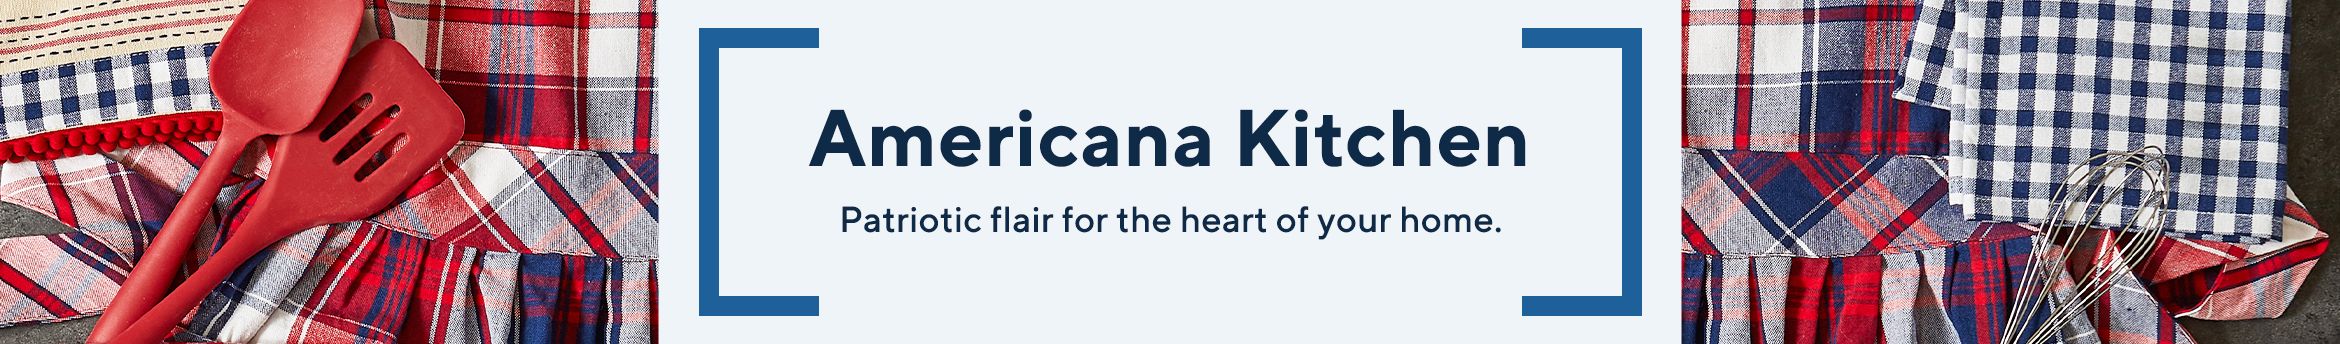 Americana Kitchen.  Patriotic flair for the heart of your home.  